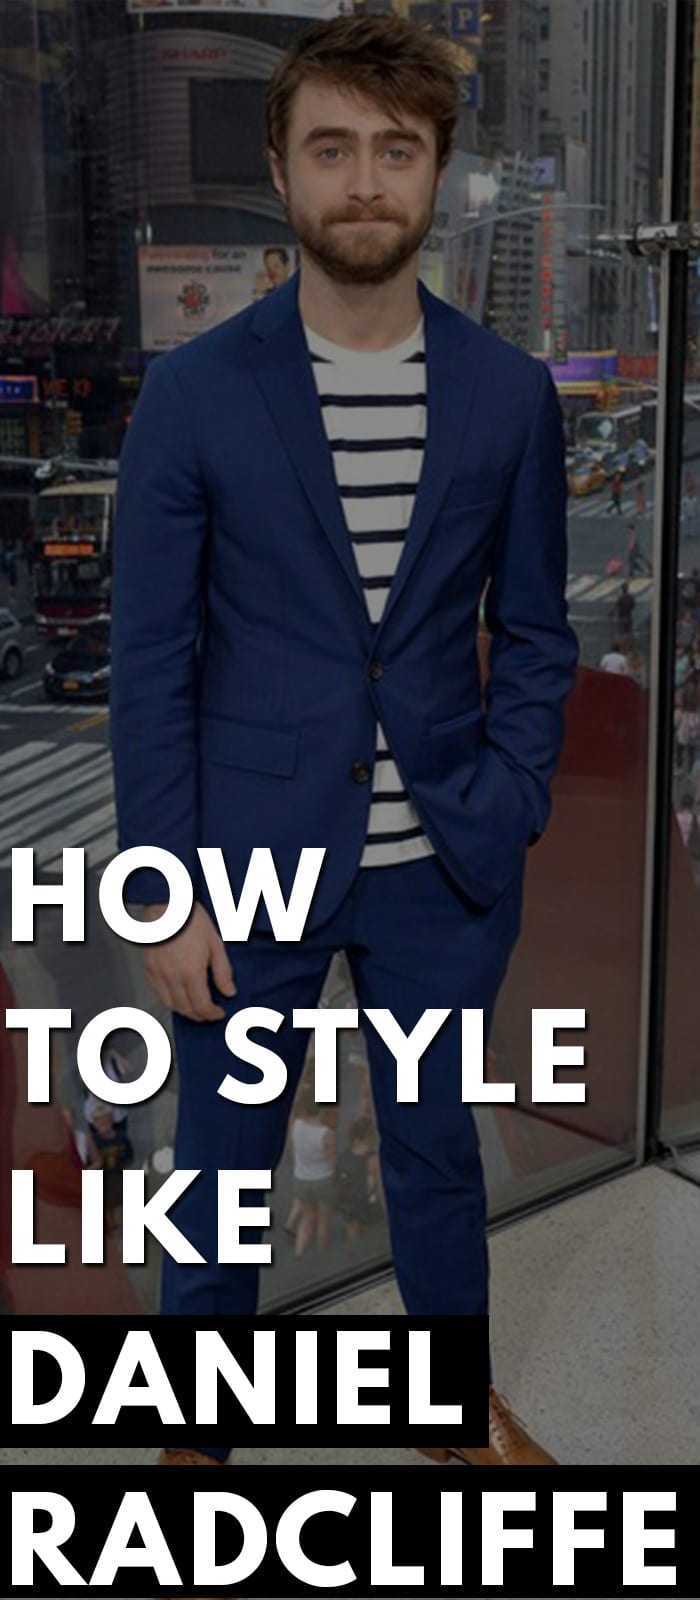 How To Style Like Daniel Radcliffe.